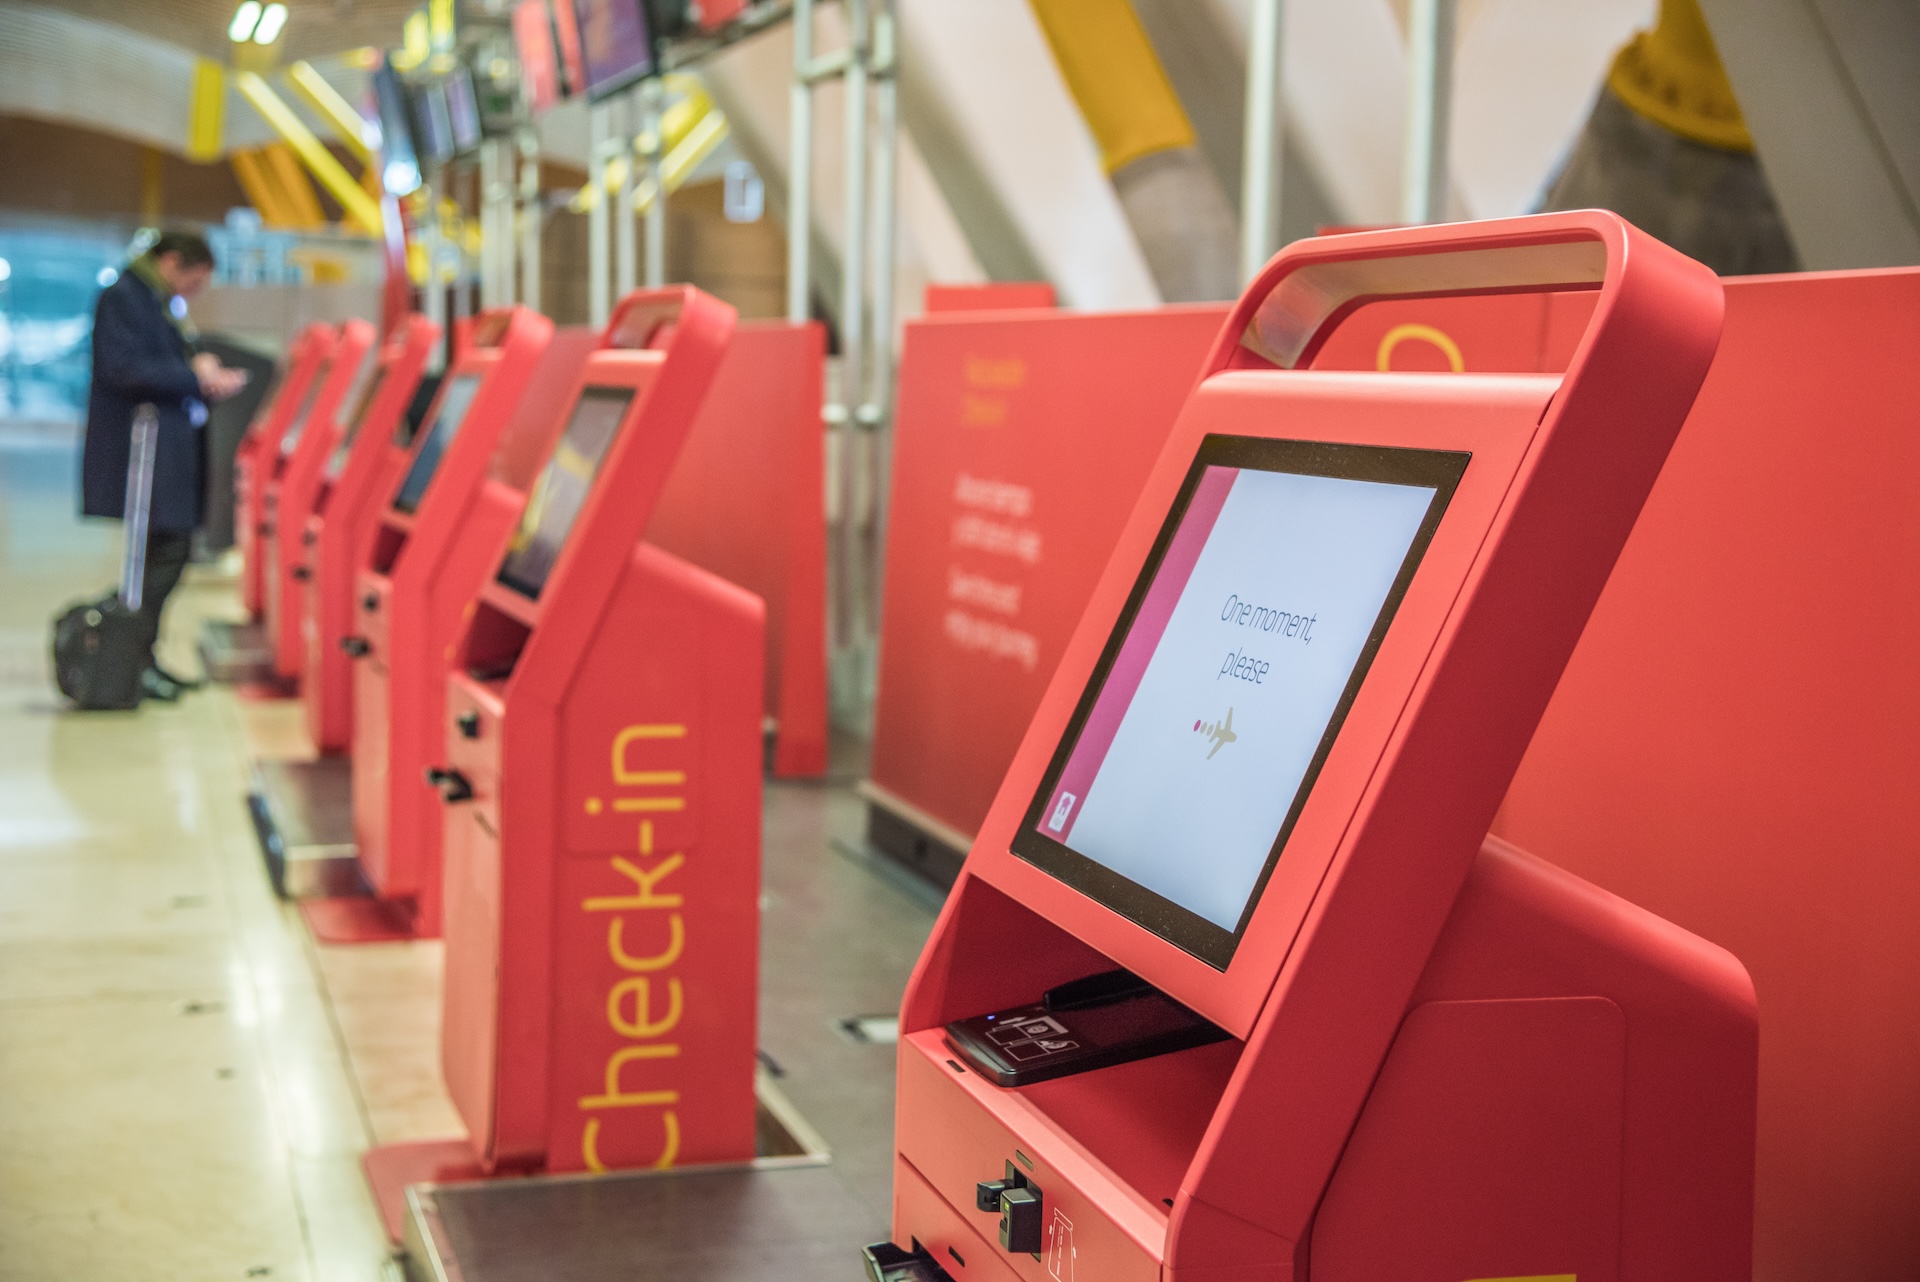 red self machines check-in service at the airport kiosk